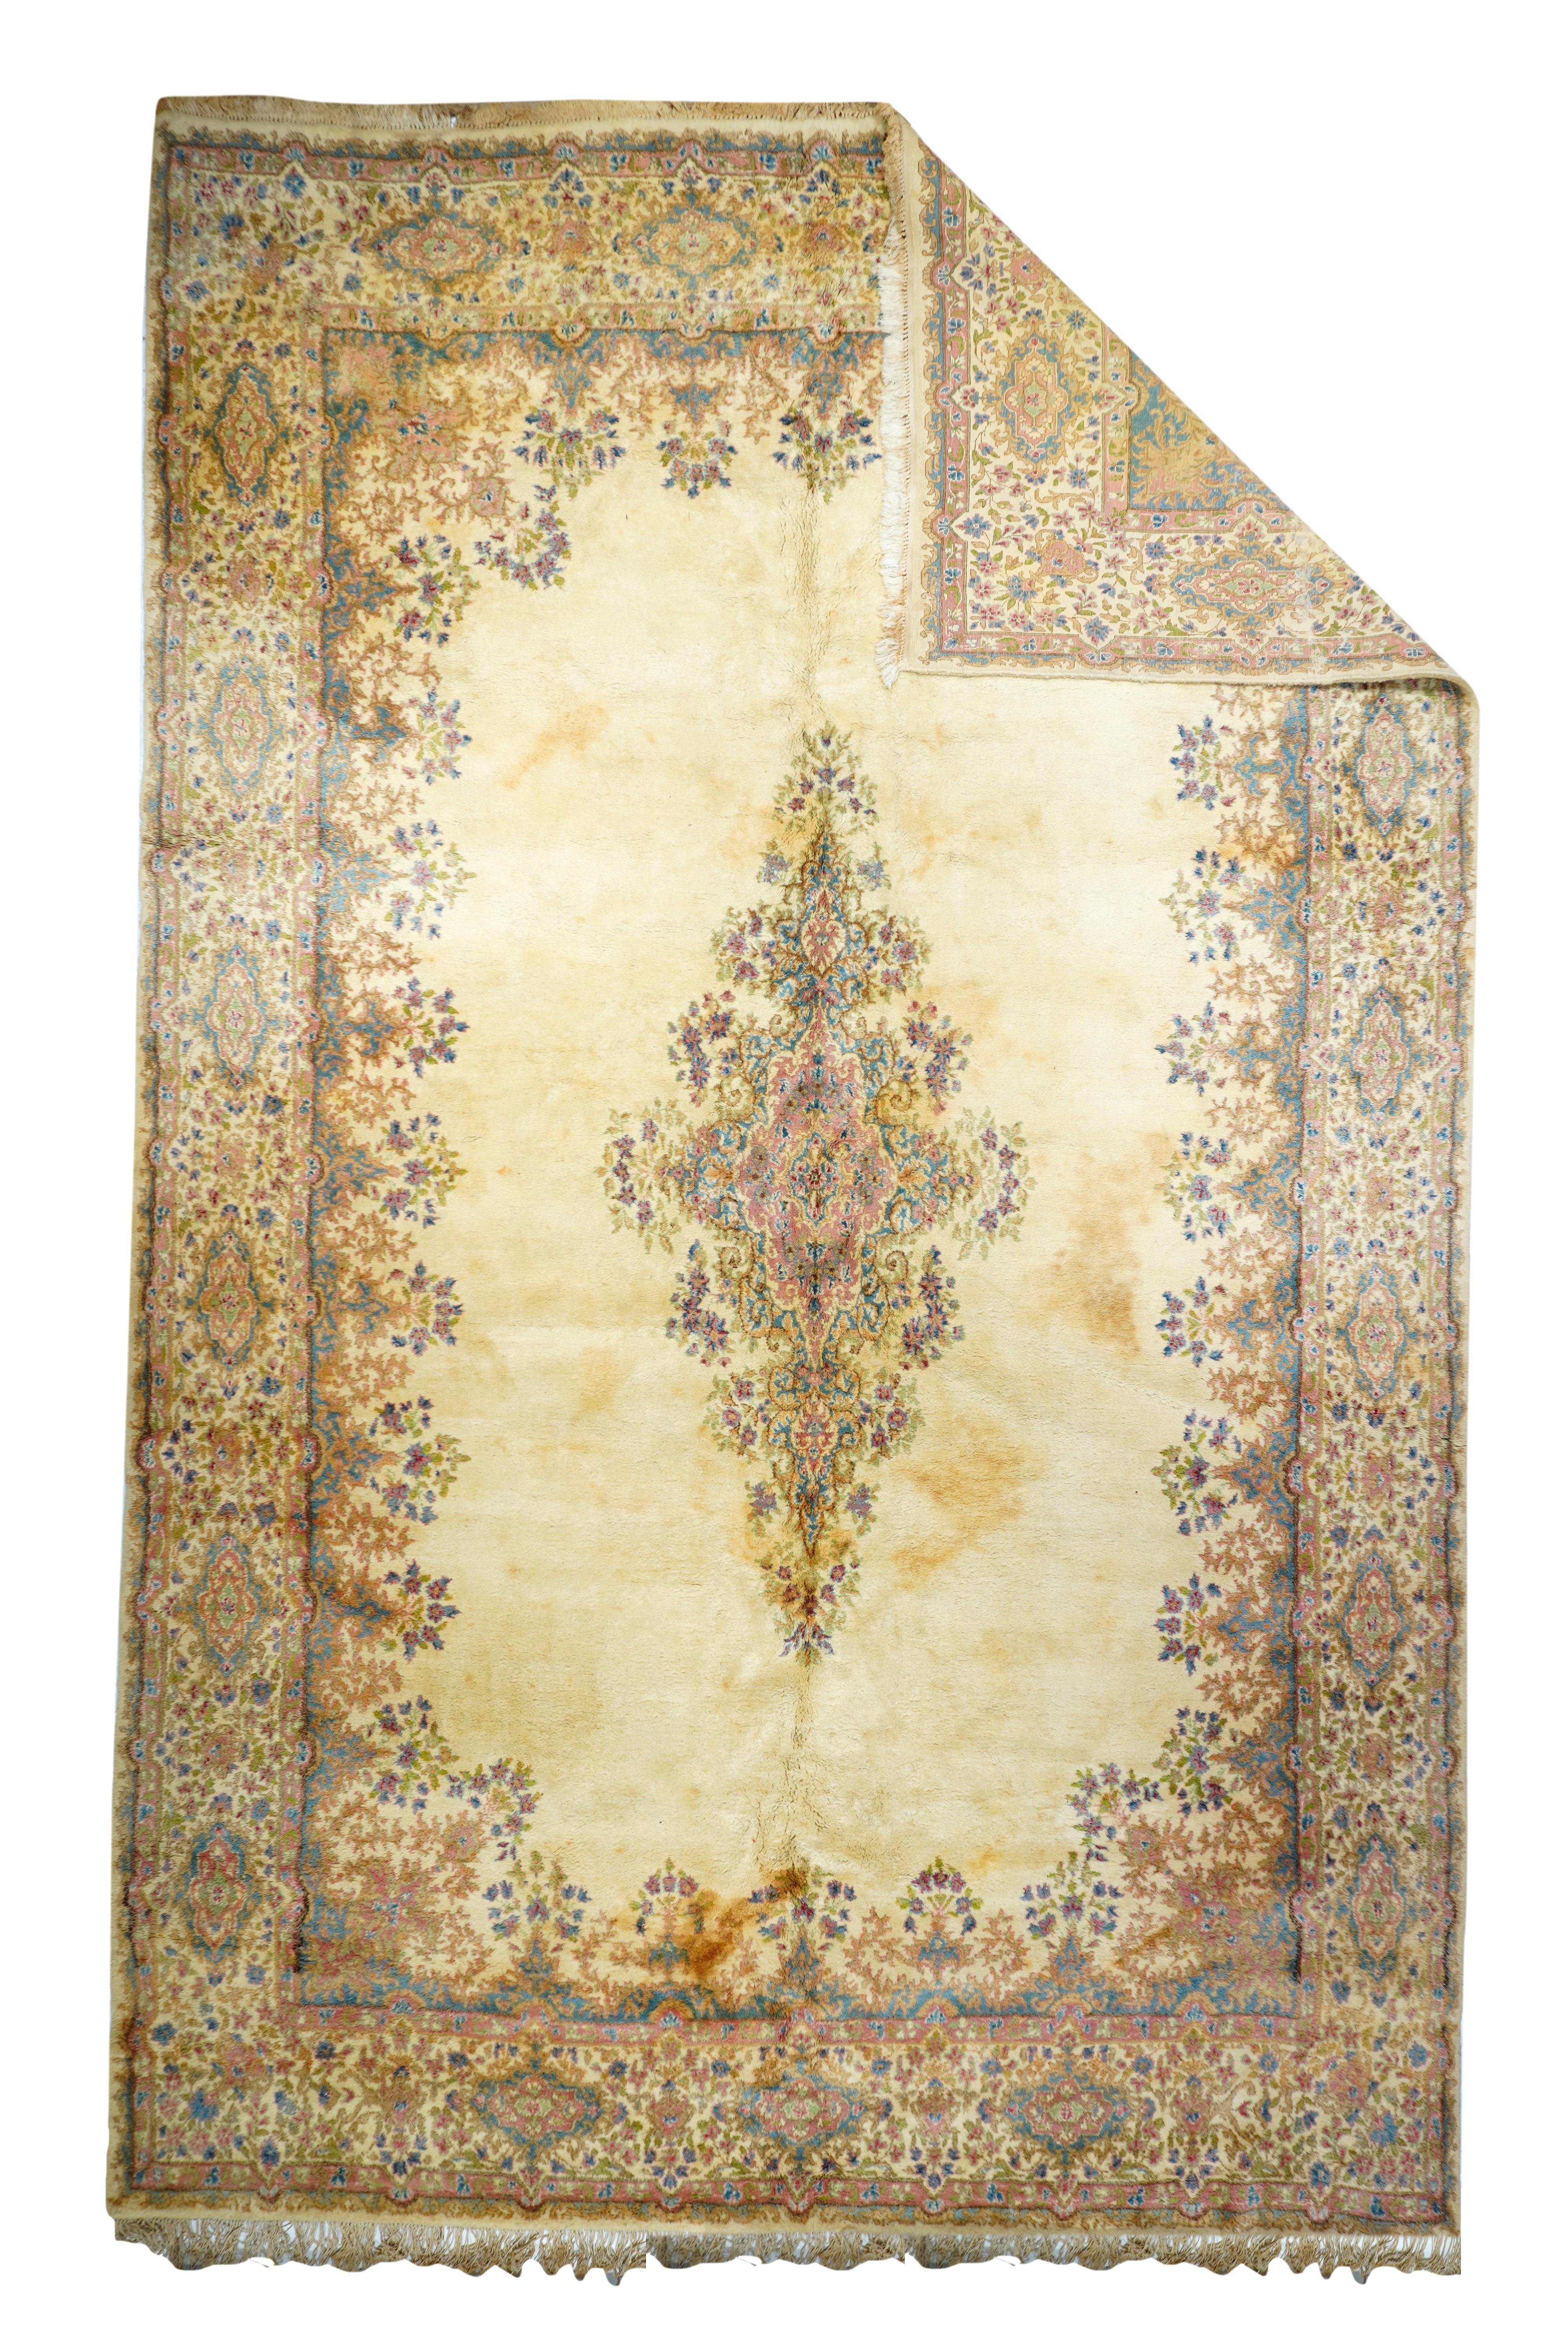 Now compromised by staining, this vintage SE Persian city weaving shows an open sandy-ecru field edged with filigree floral elements, and hosting a filigree floral medallion. Sandy-ecru border with cartouches. Lush pile, medium weave. Fairly good